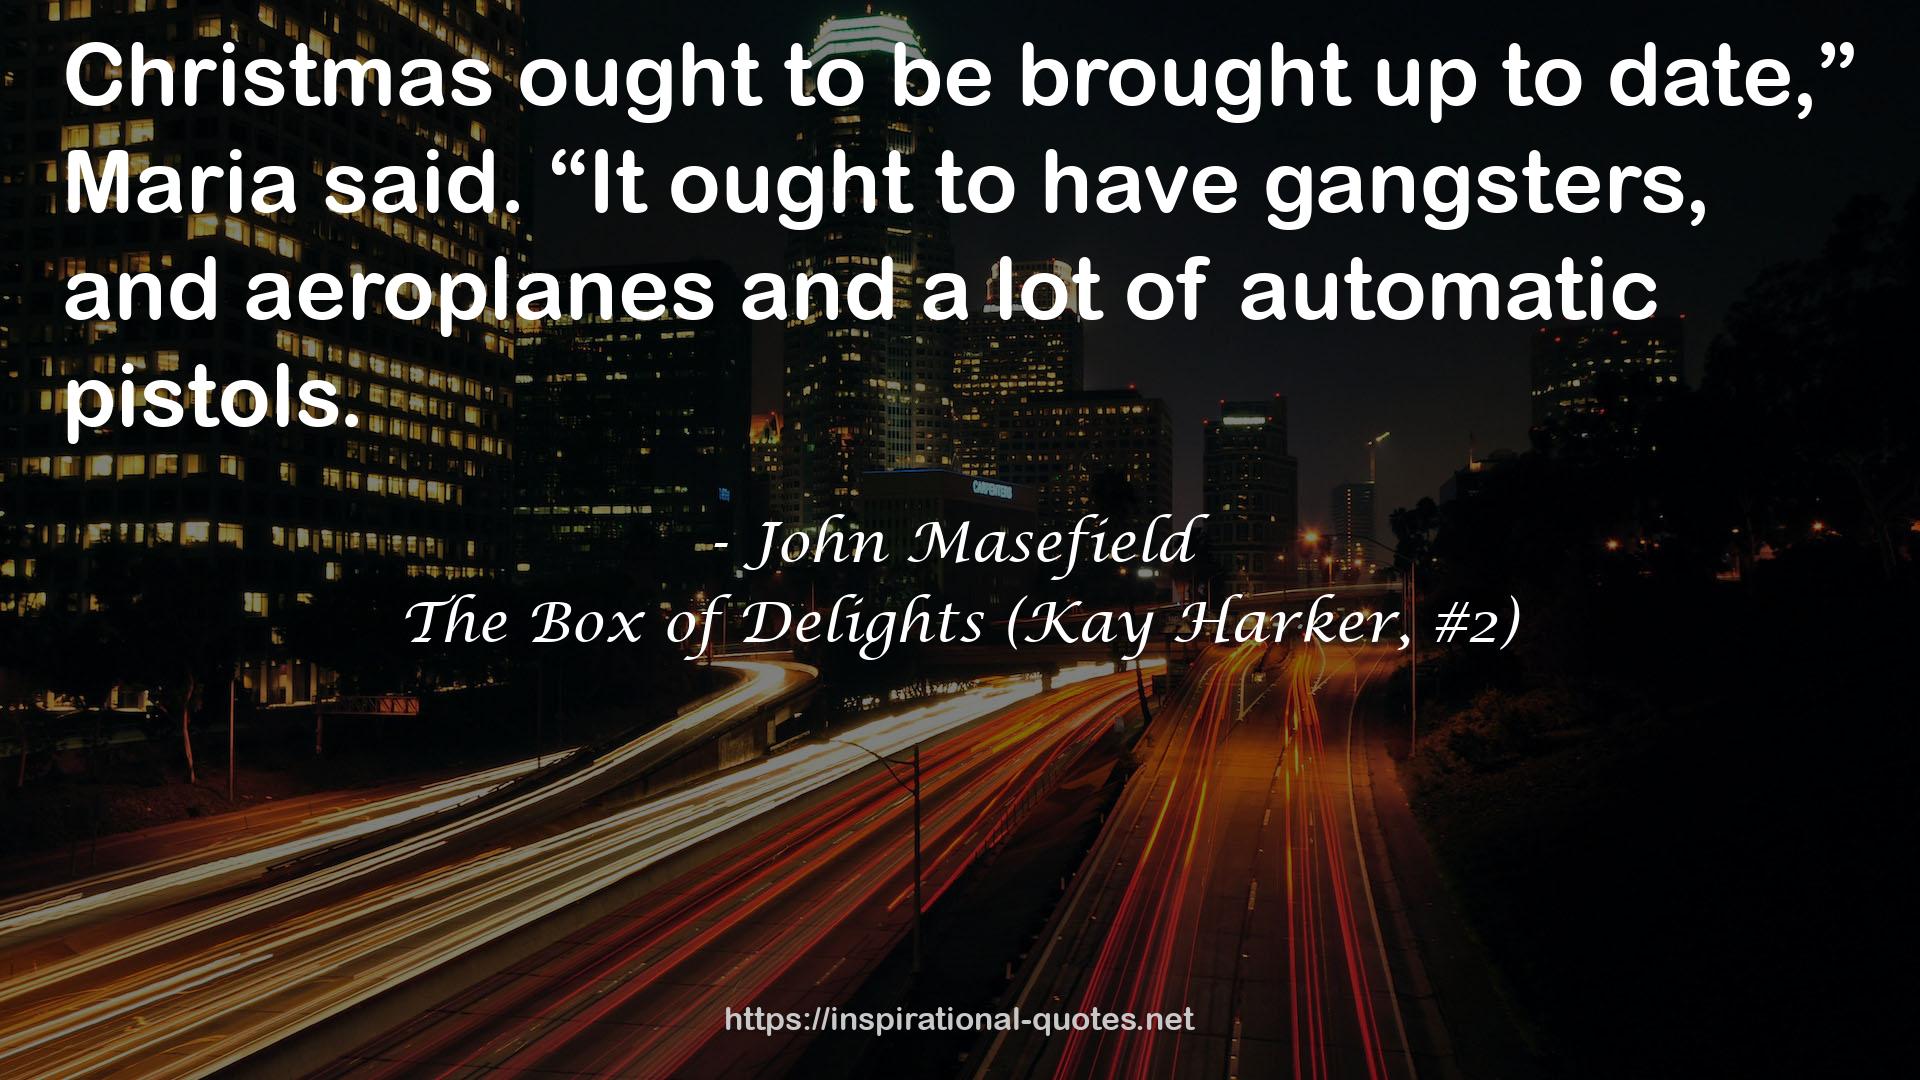 The Box of Delights (Kay Harker, #2) QUOTES